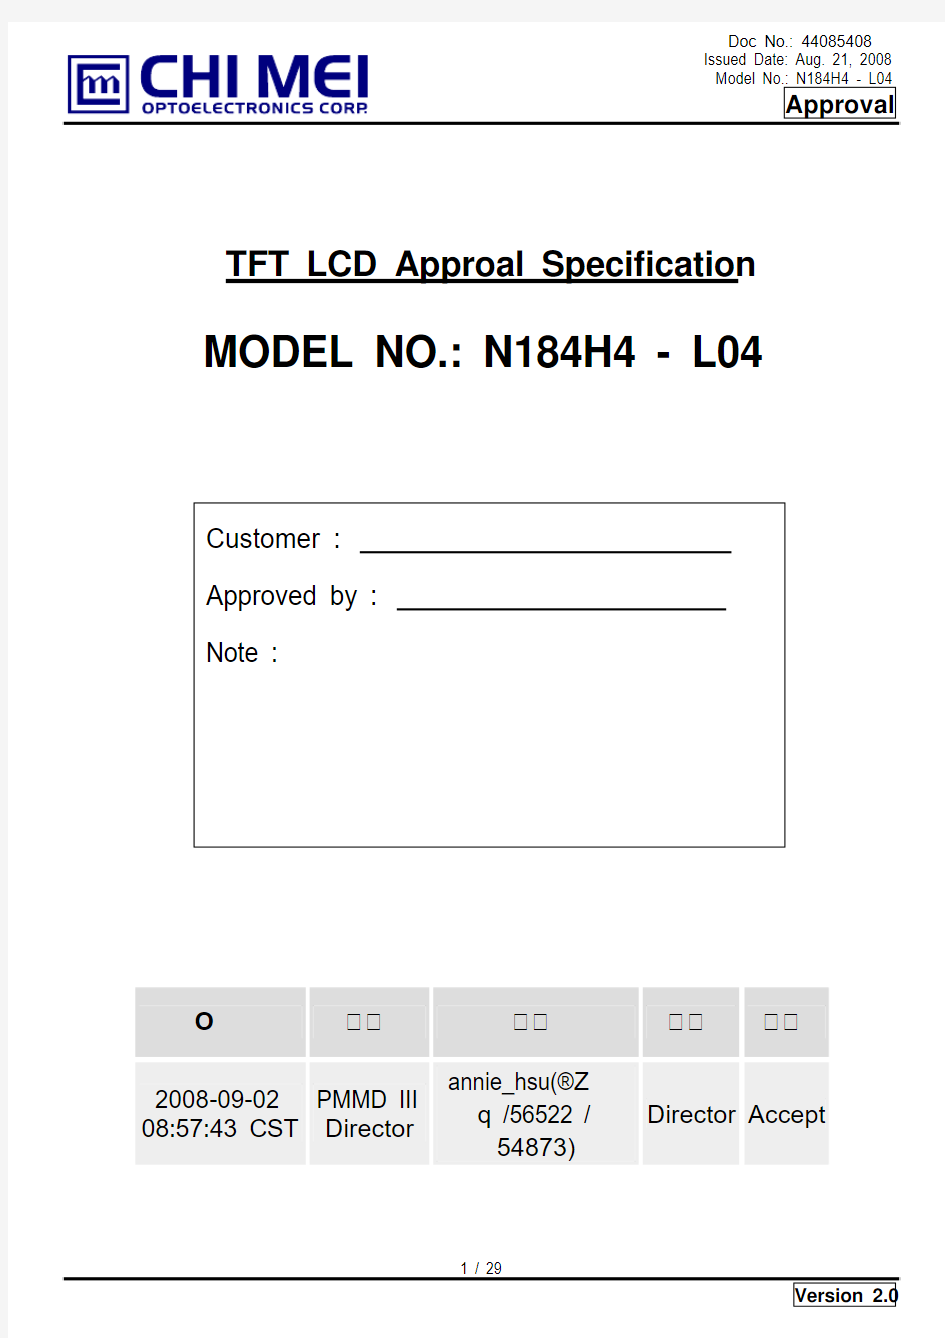 TFT-LCD Approval Specification N184H4-L04 ver 2.0